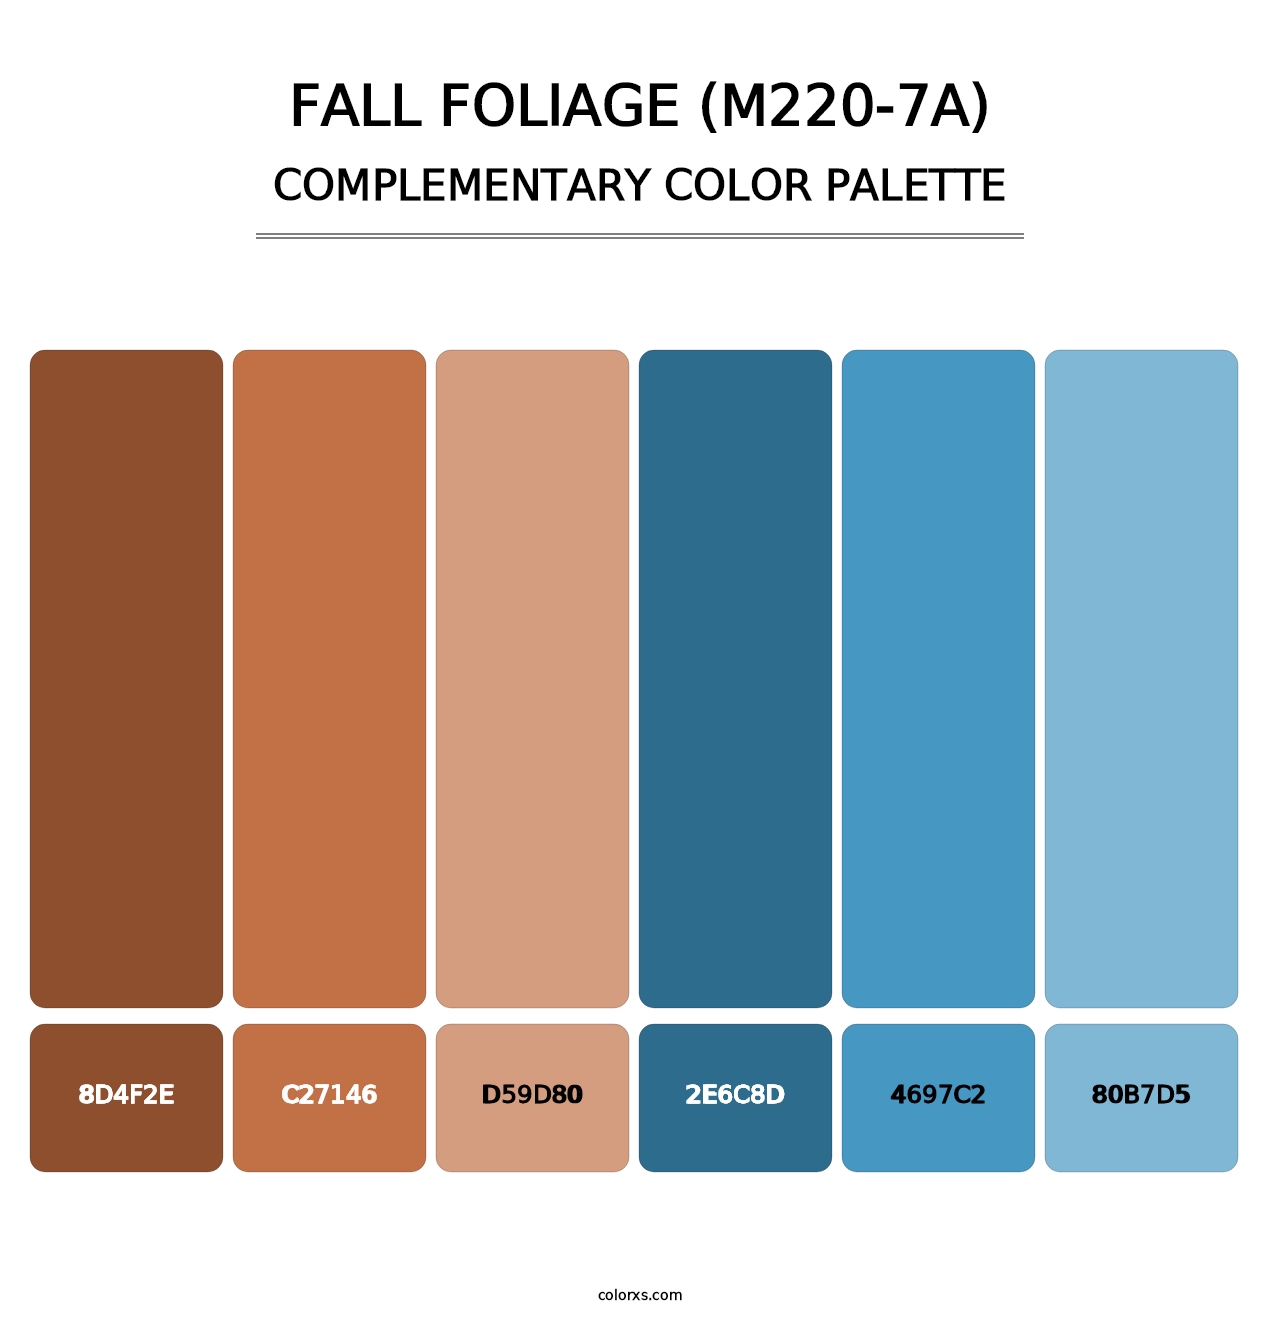 Fall Foliage (M220-7A) - Complementary Color Palette